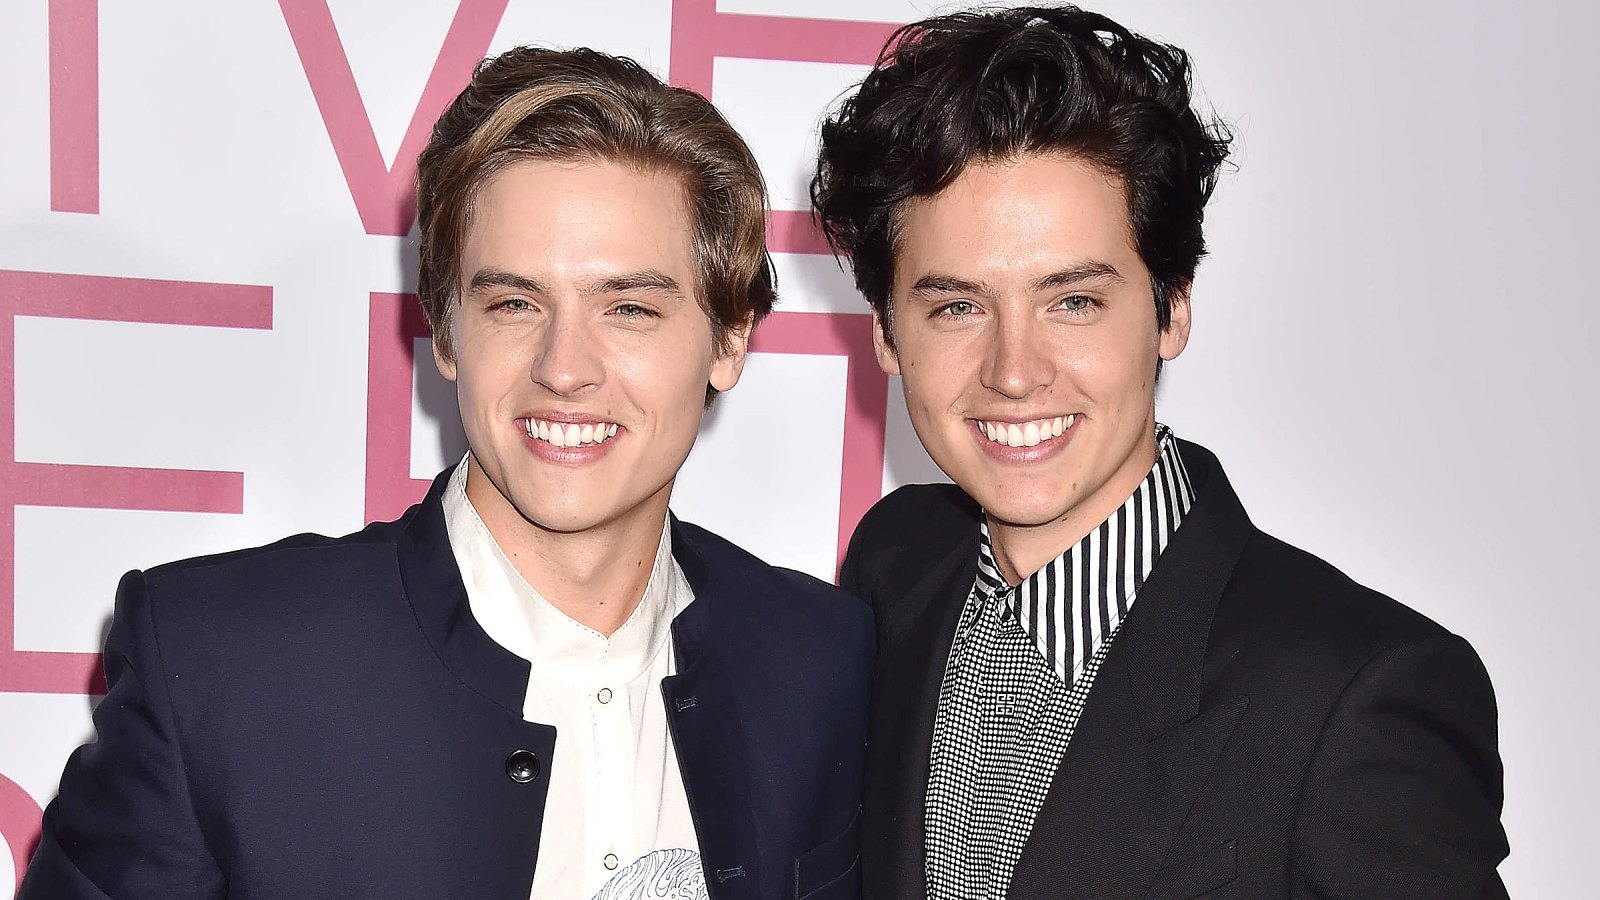 Cole Sprouse Trolls Brother Dylan After Selena Gomez Kiss Diss